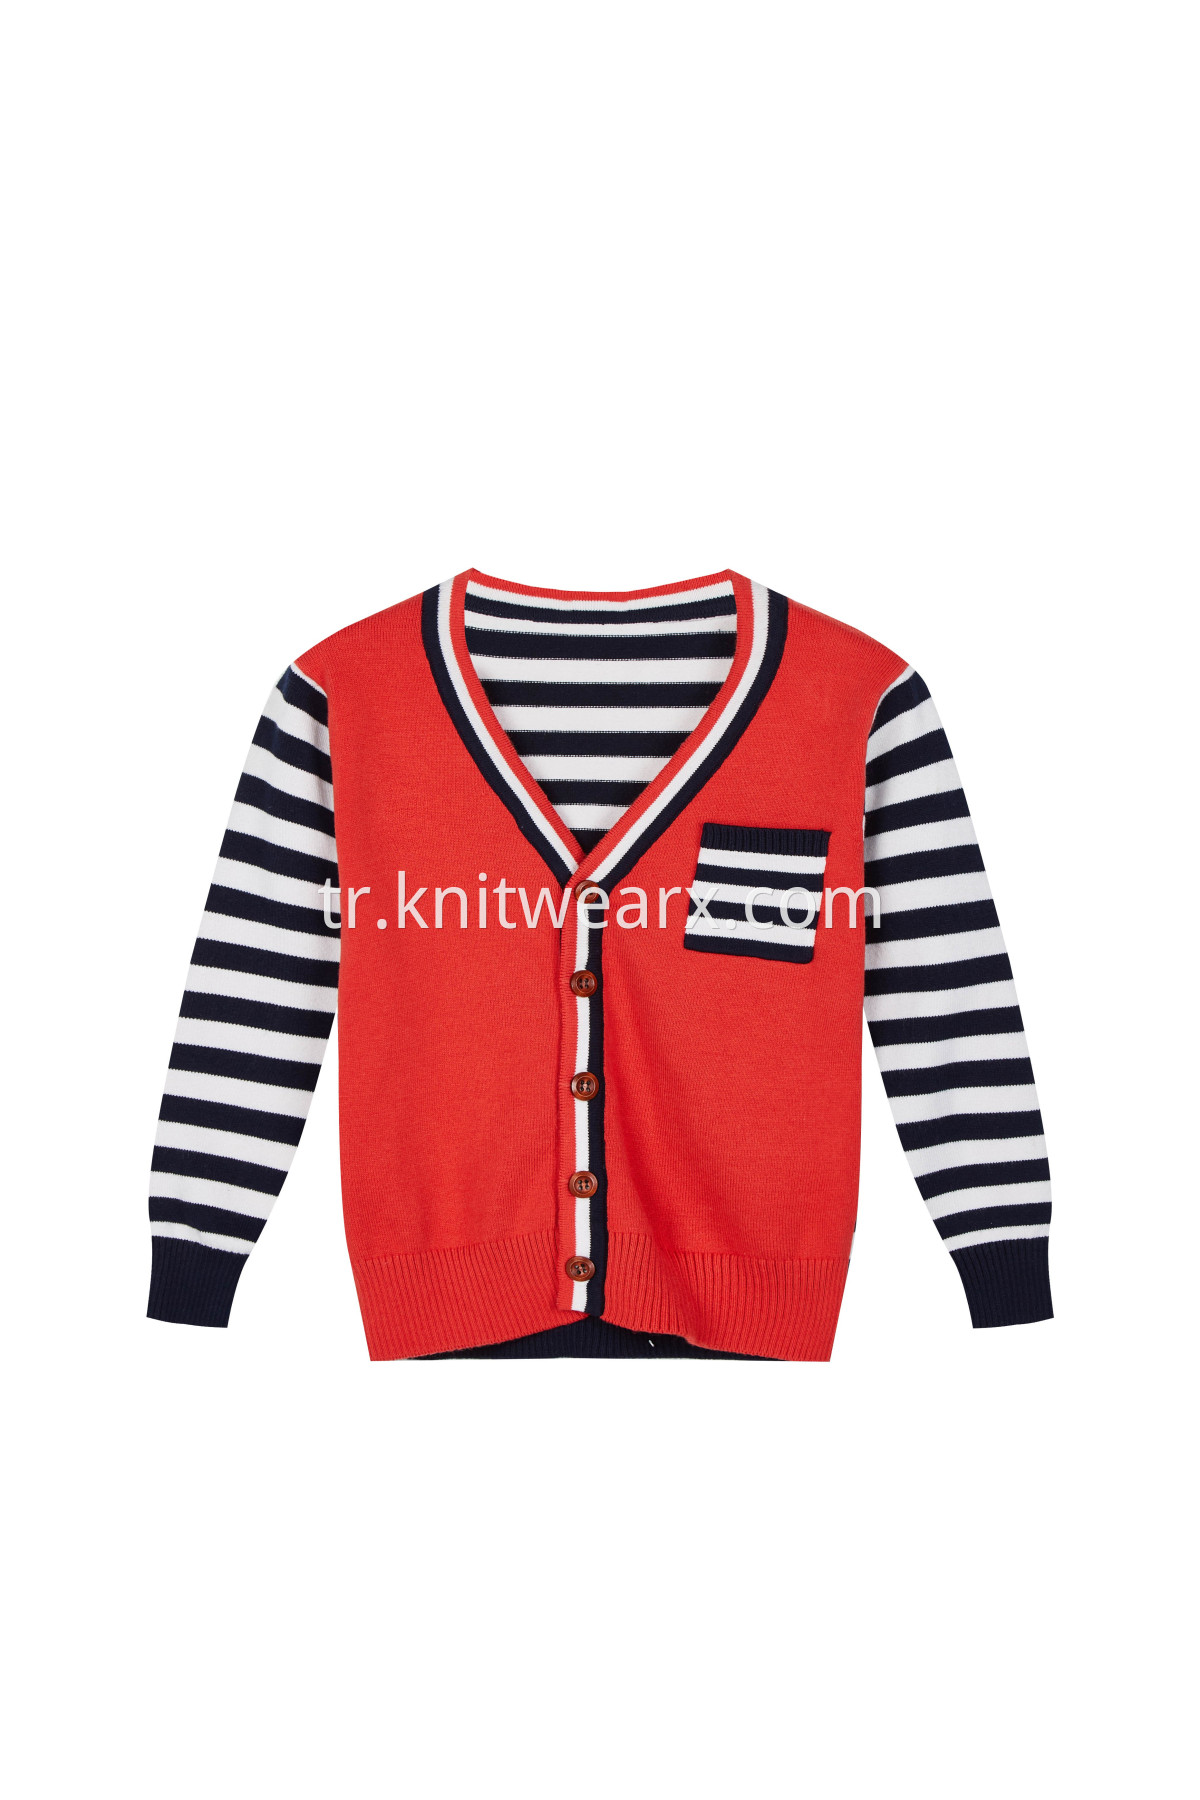 Boys's Stripe Knitted Cardigan Button Closure Long Sleeve Sweater Tops